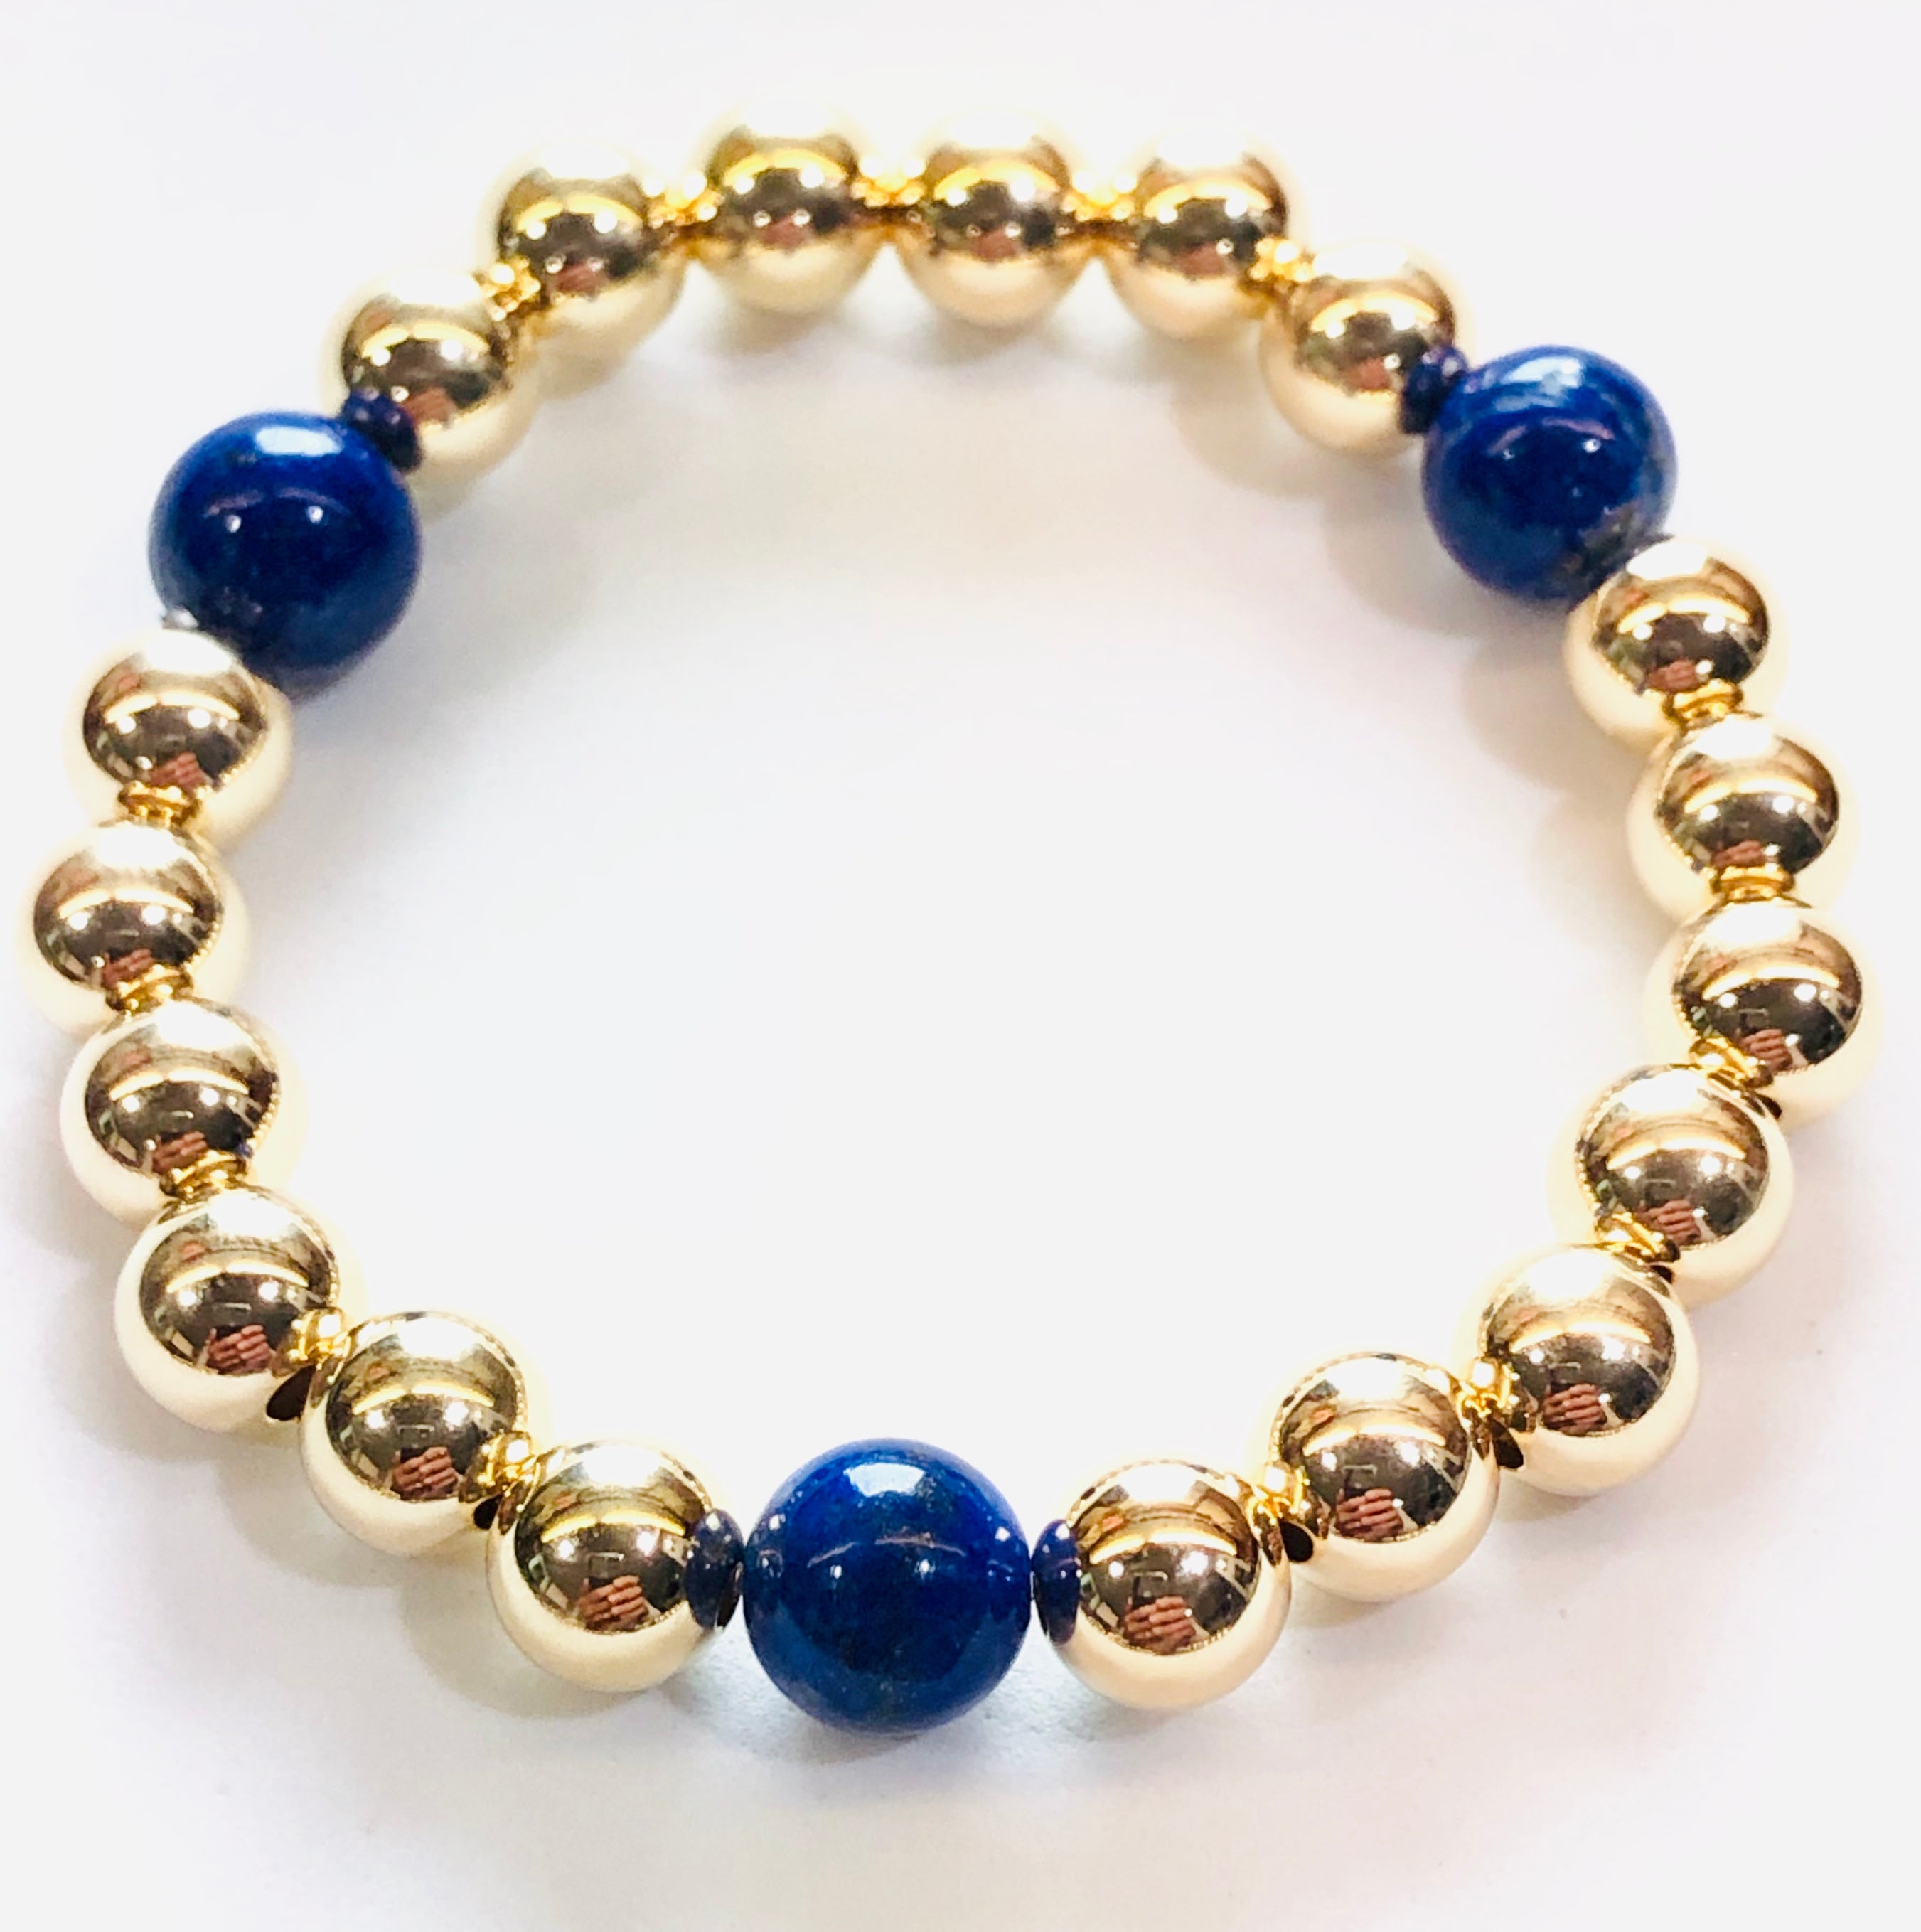 8mm 14kt Gold Filled Bead Bracelet with 3 8mm Blue Lapis Beads